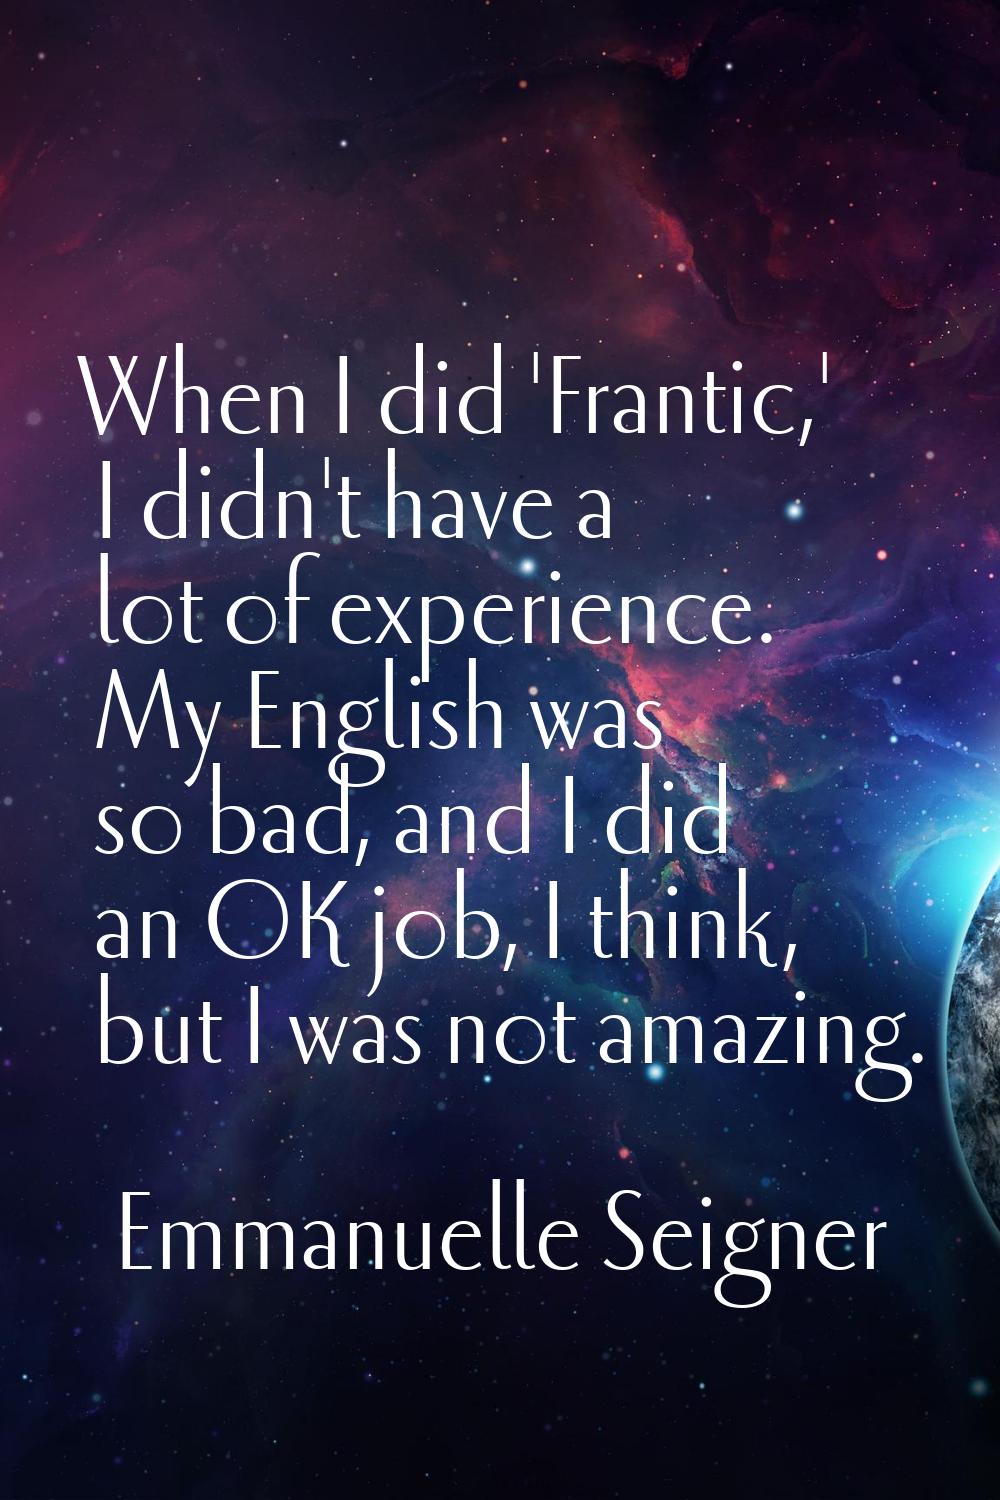 When I did 'Frantic,' I didn't have a lot of experience. My English was so bad, and I did an OK job